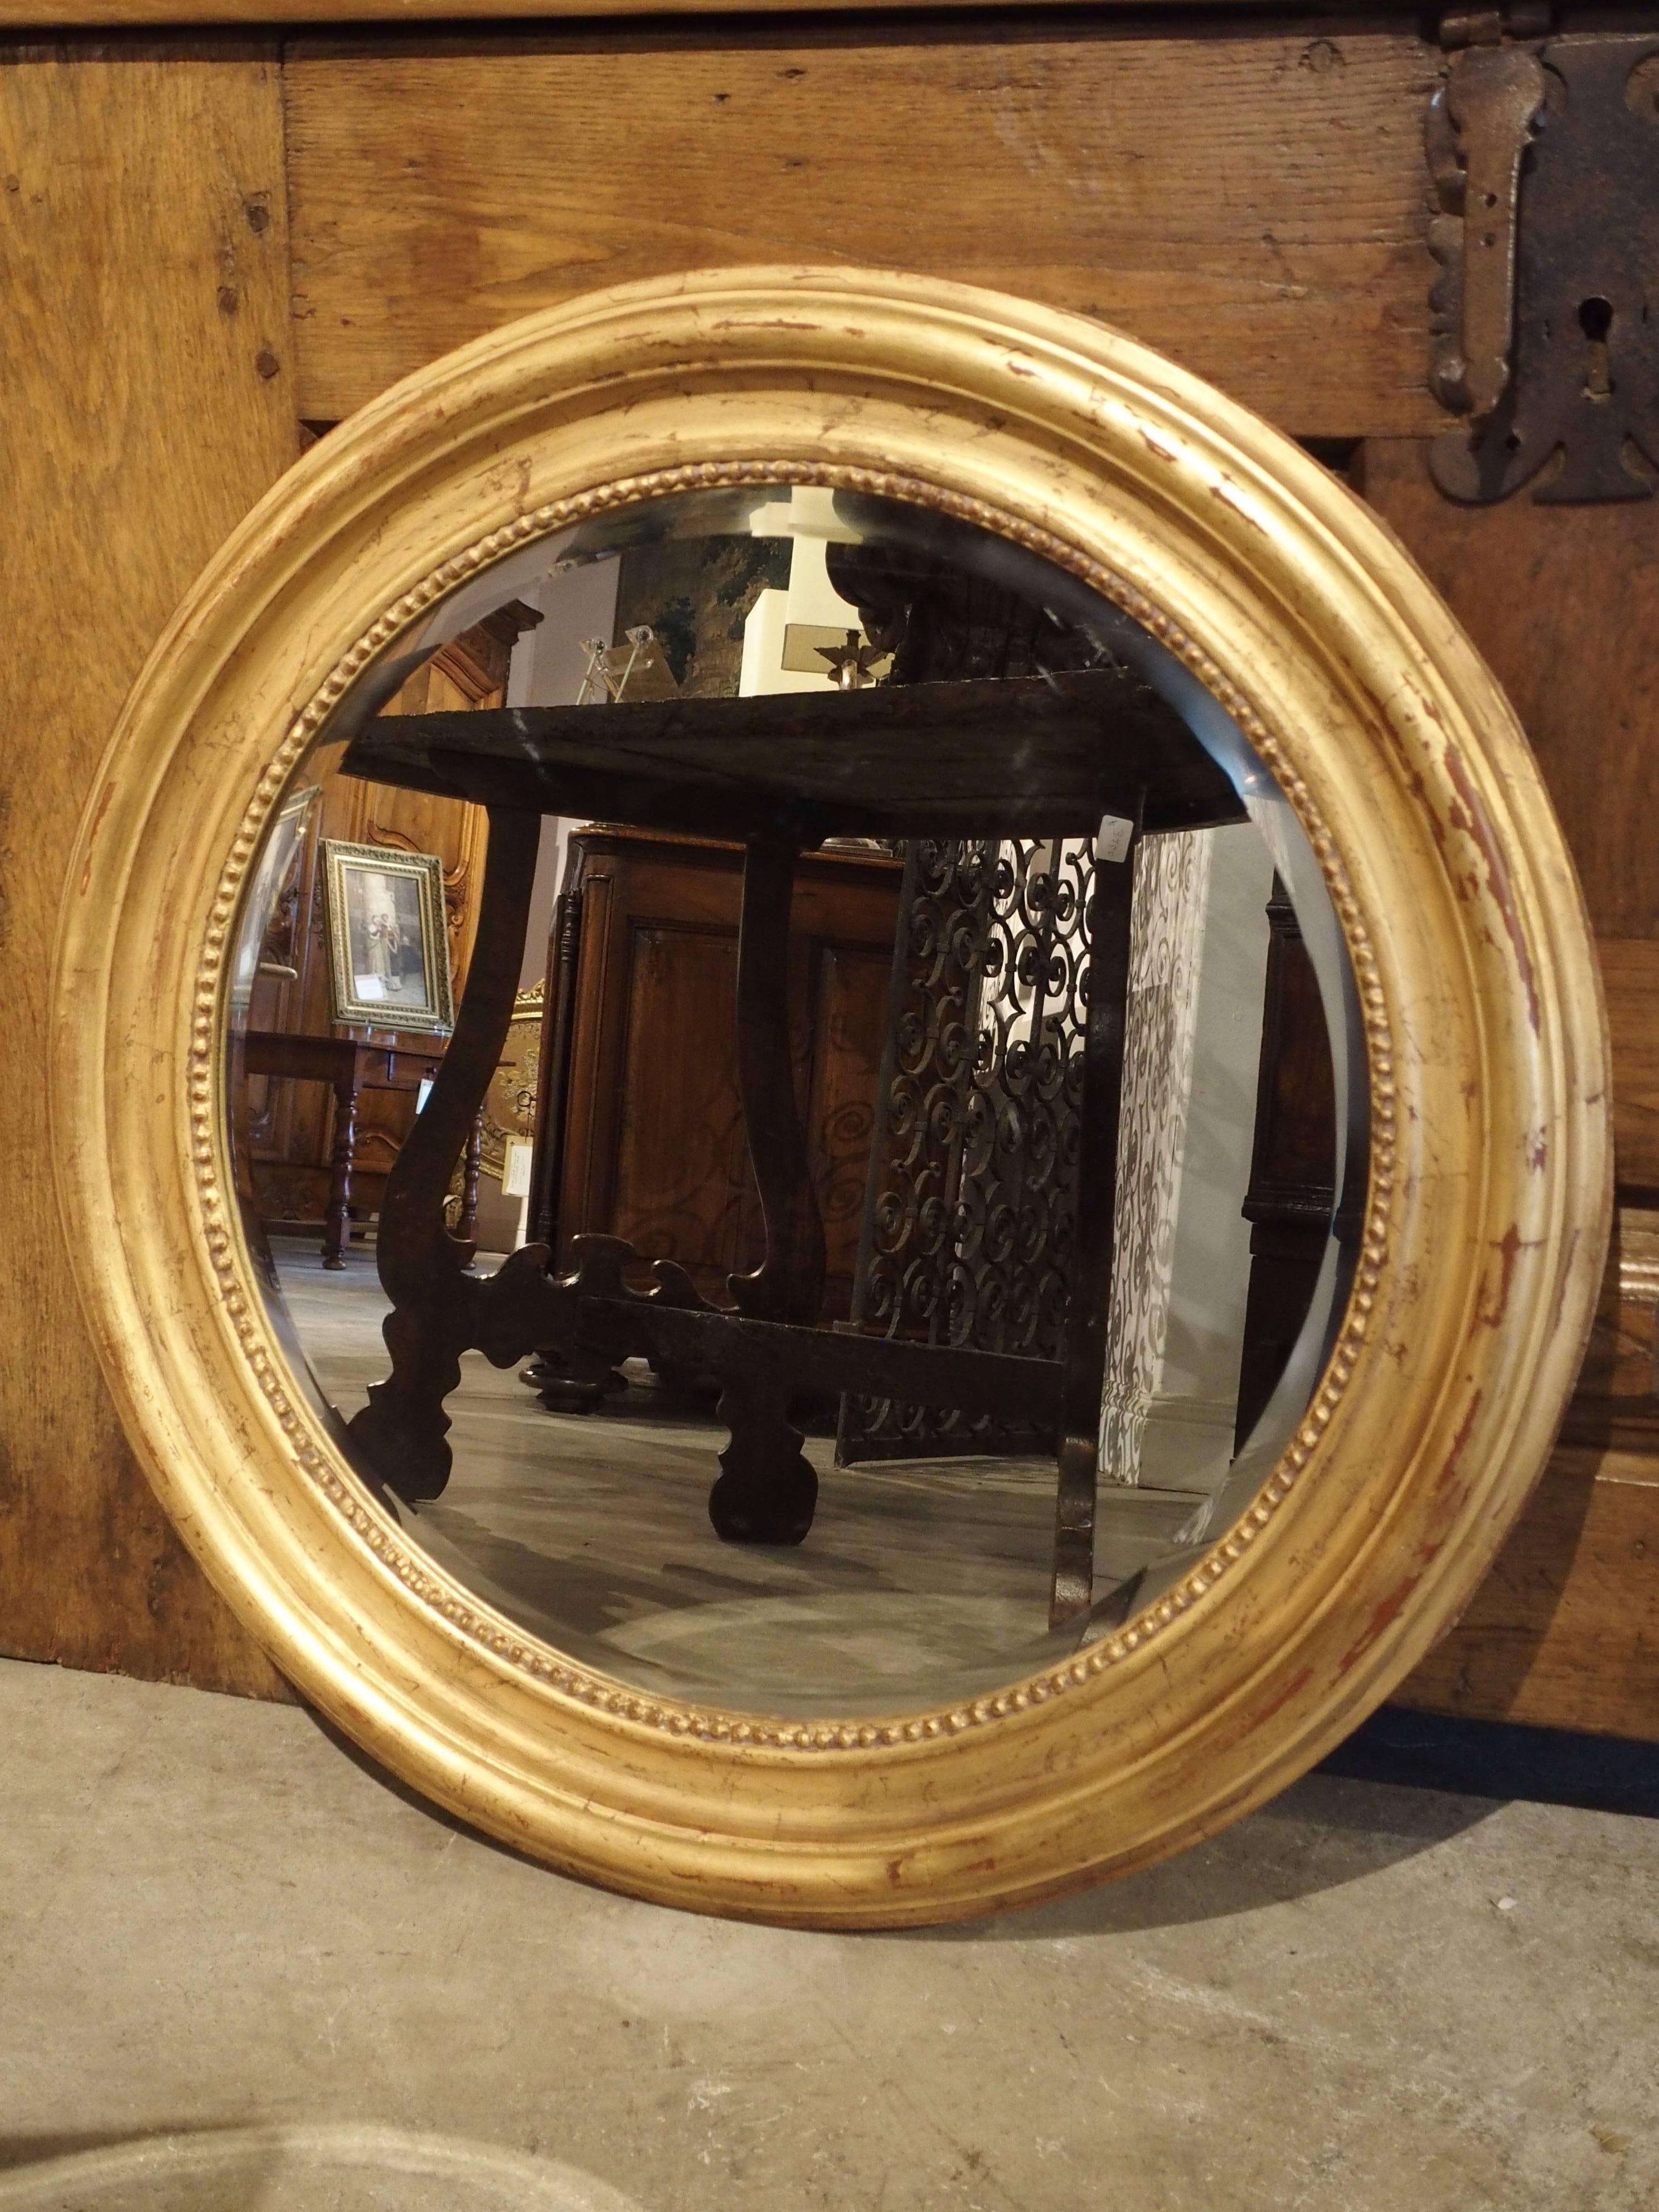 From France, this unusual round, Louis Philippe style mirror has beading surrounding the bevel of the mirror. All period Louis Philippe mirrors are rectangular, so this is a wonderful take on the late 19th century mirror. The frame has raised and